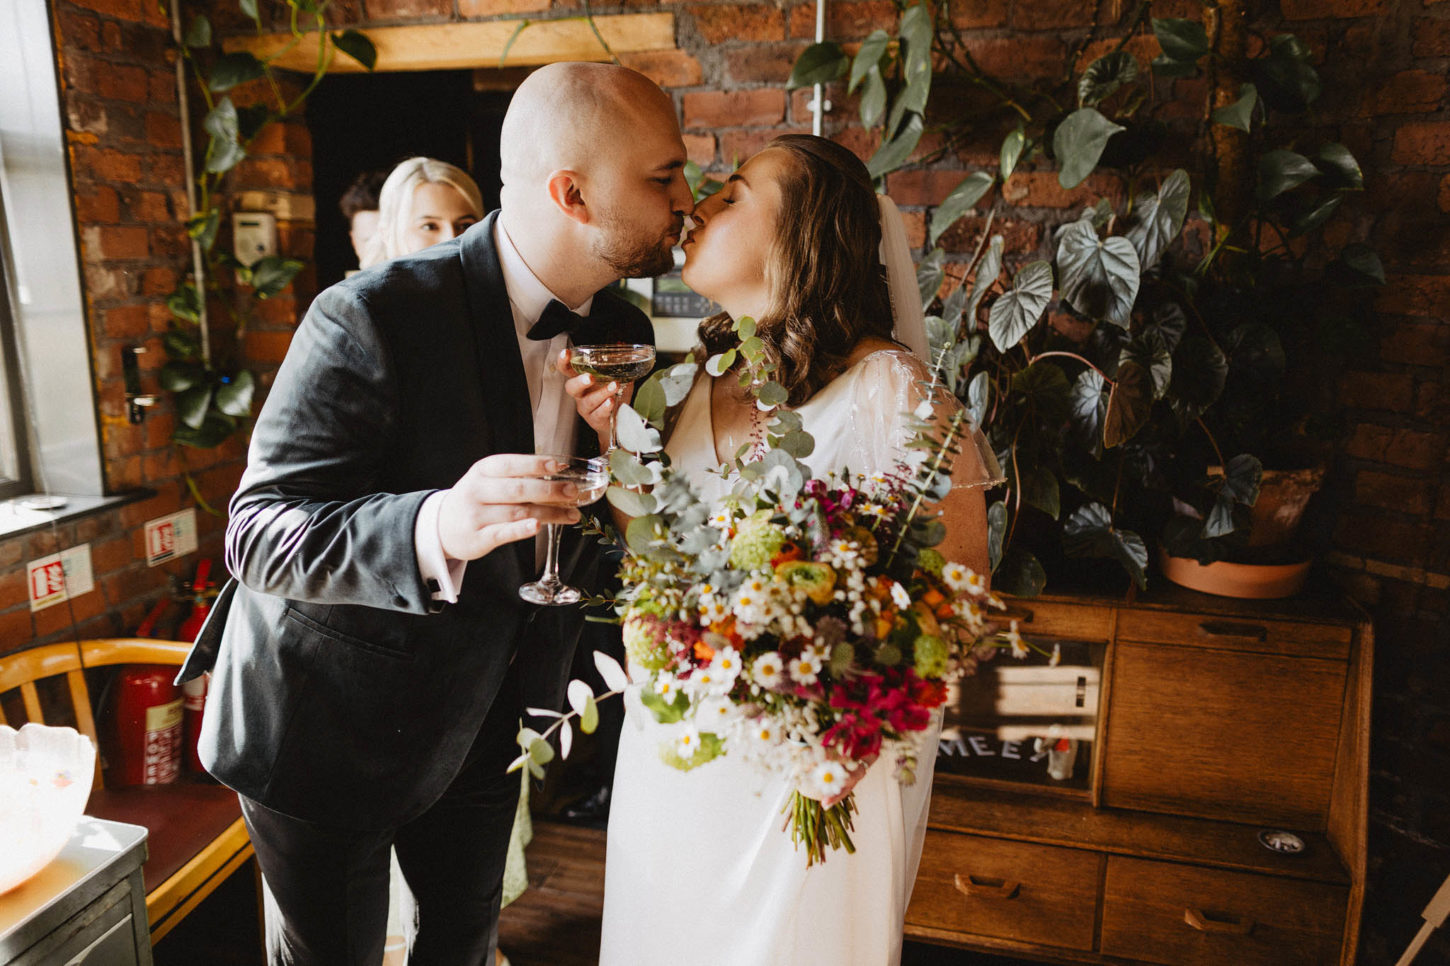 Couple kissing at wedding with champagne and bouquet.